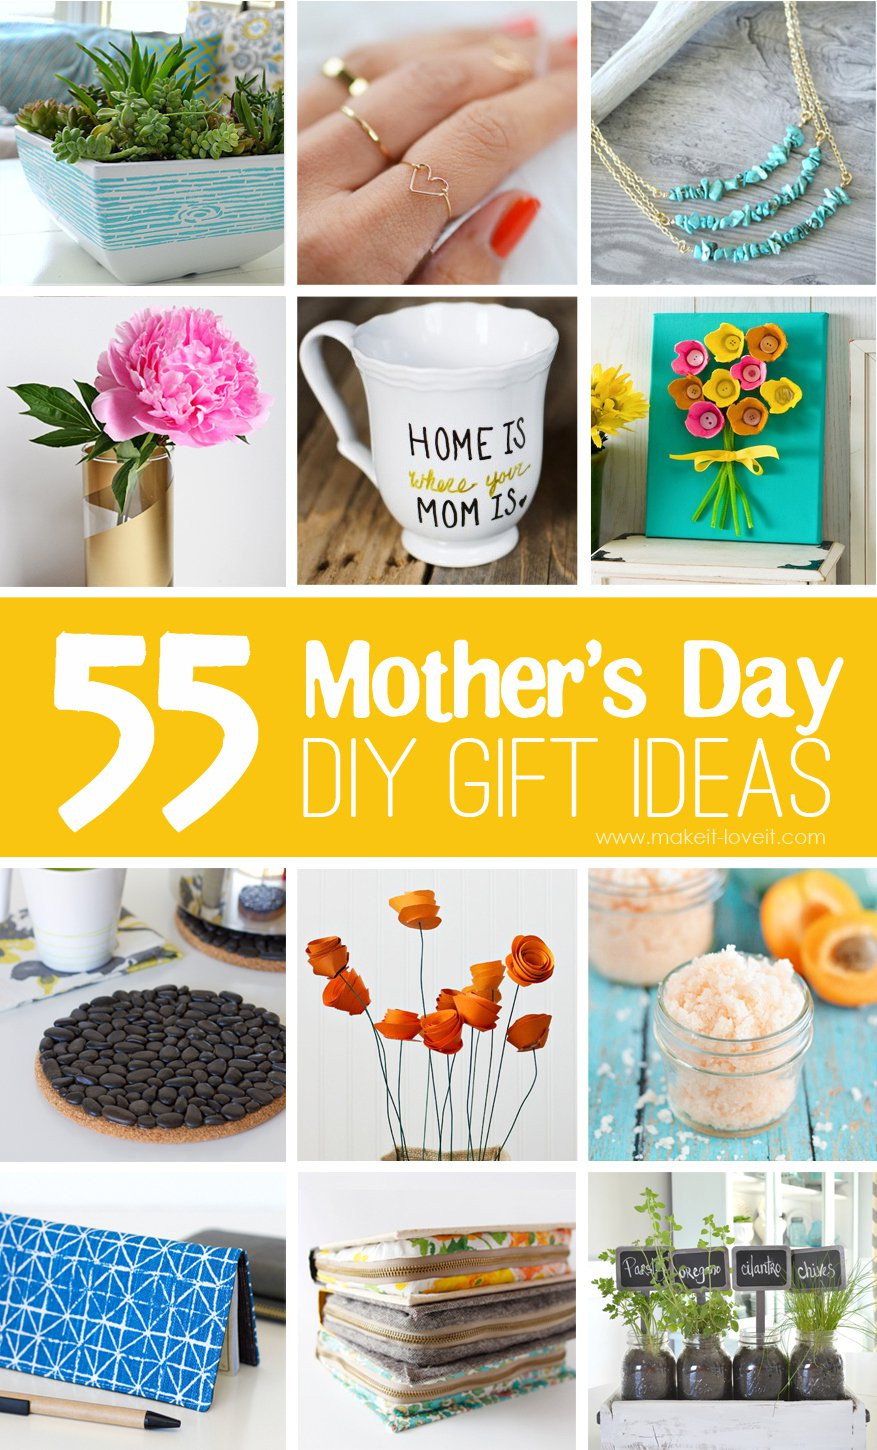 Ideas For A Mothers Day Gift
 40 Homemade Mother s Day Gift Ideas